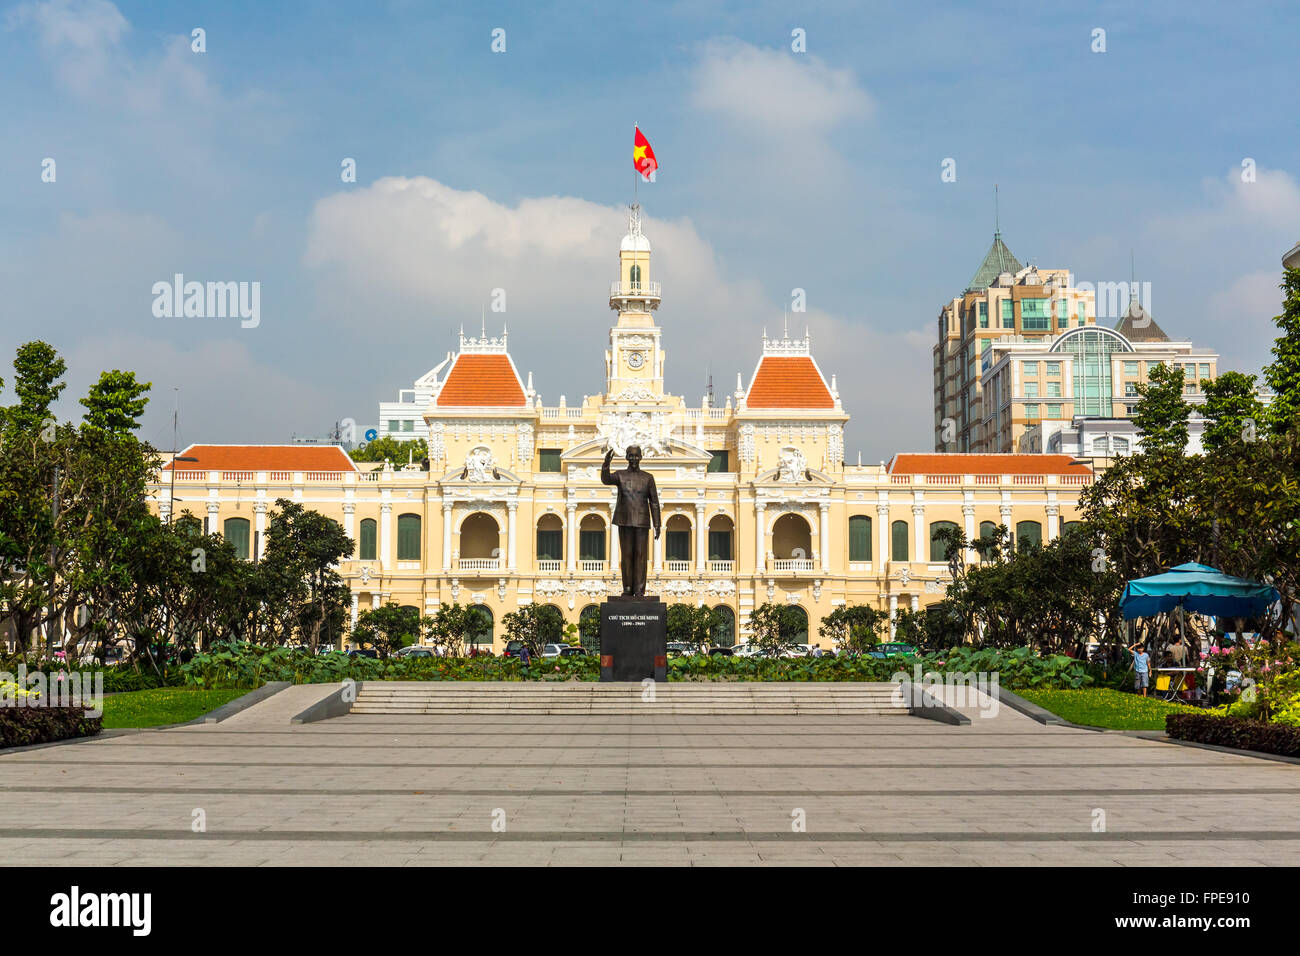 View from steps leading up to City Hall, Ho Chi Minh City, Vietnam. Stock Photo